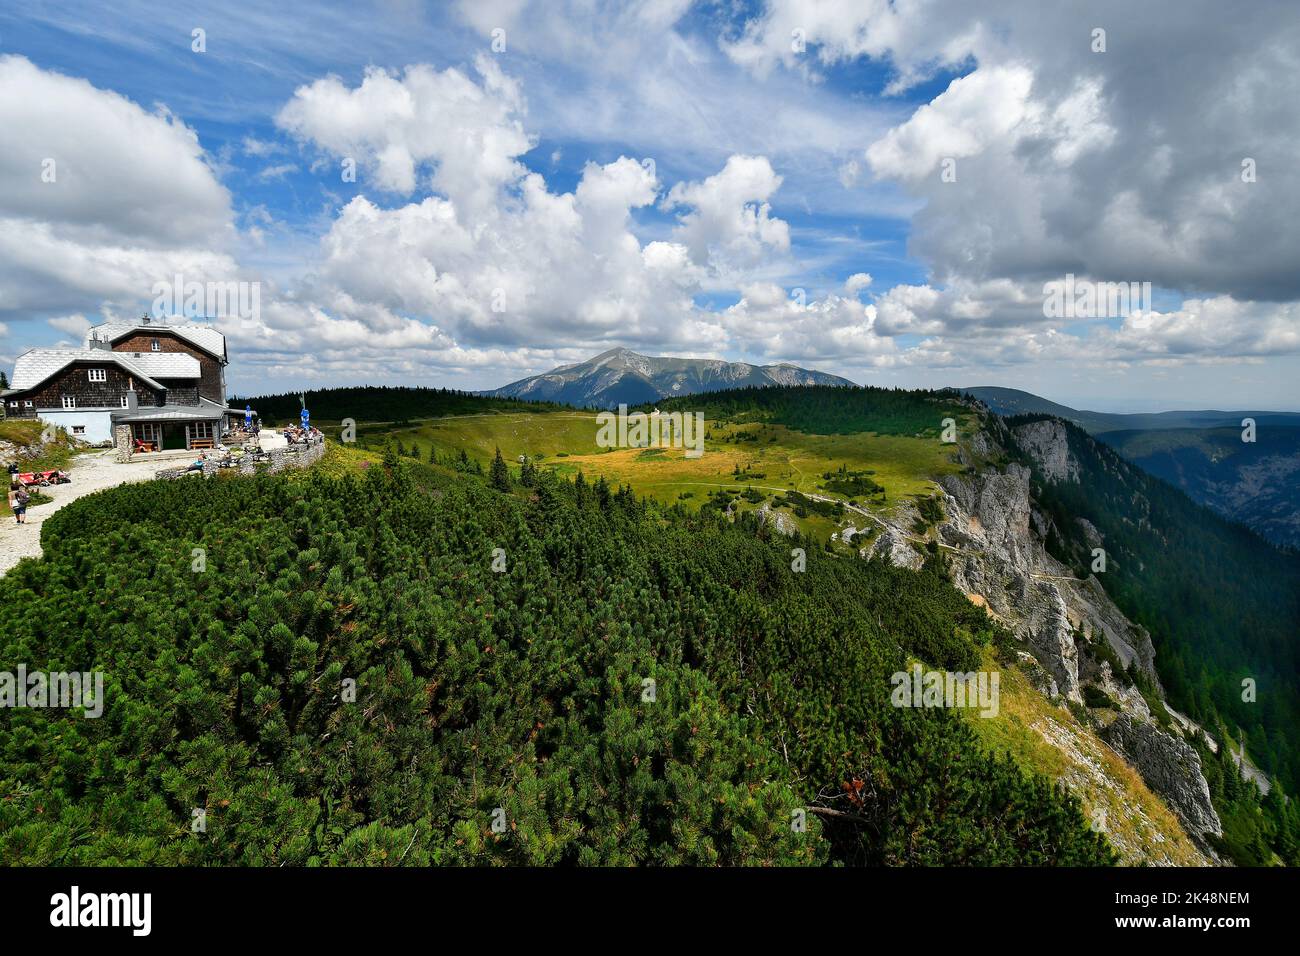 Hirschwang, Austria - August 10, 2022: Unknown hikers take a break at the mountain inn called Ottohaus on Rax mountain in Lower Austria, Schneeberg mo Stock Photo